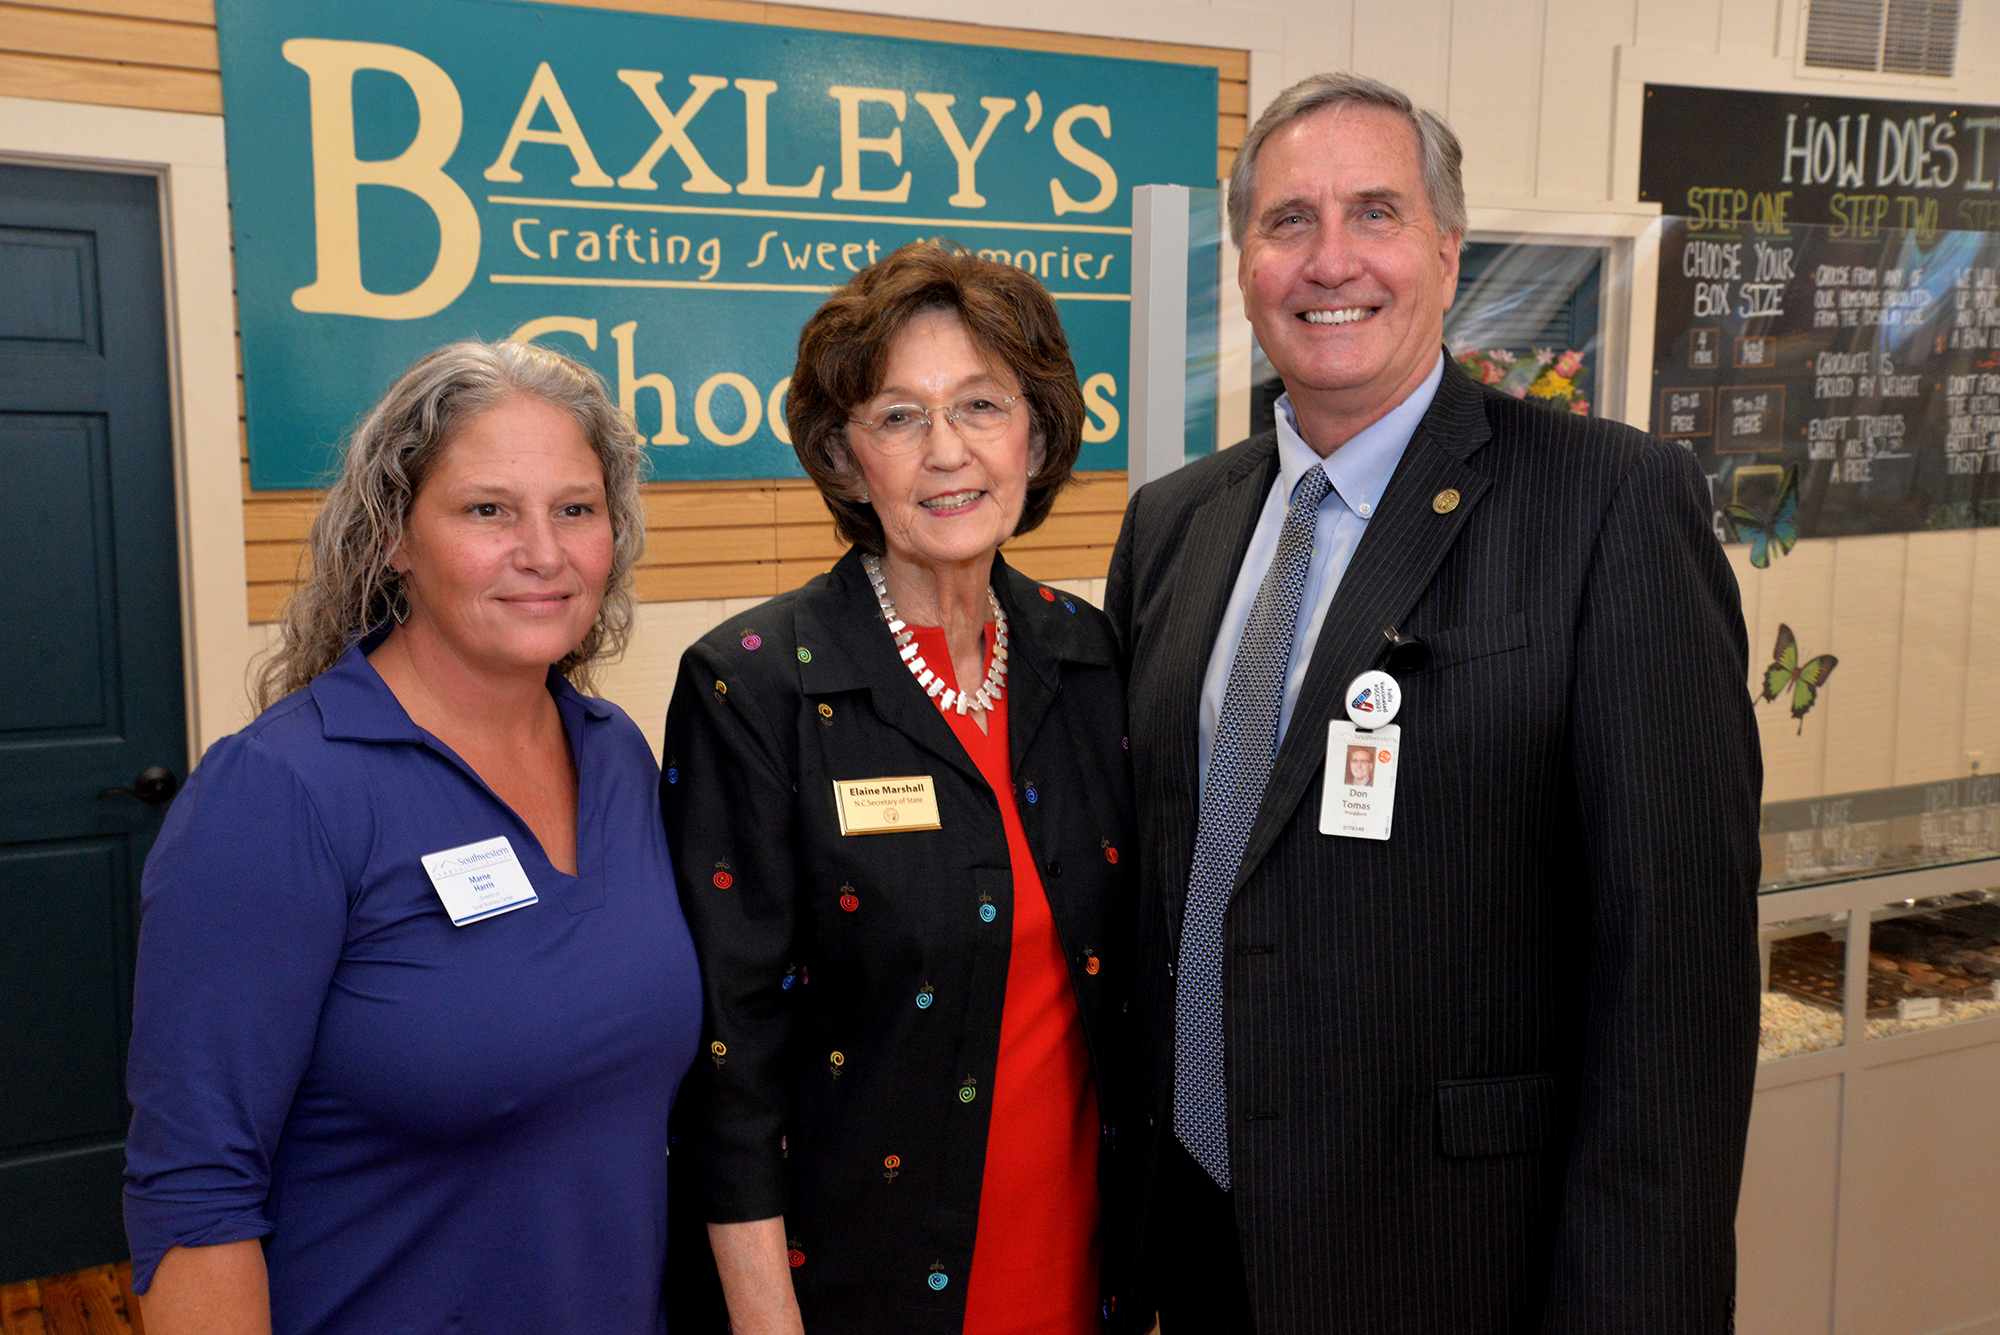 Secretary of state poses for photo with SCC's president and Director of Small Business Center